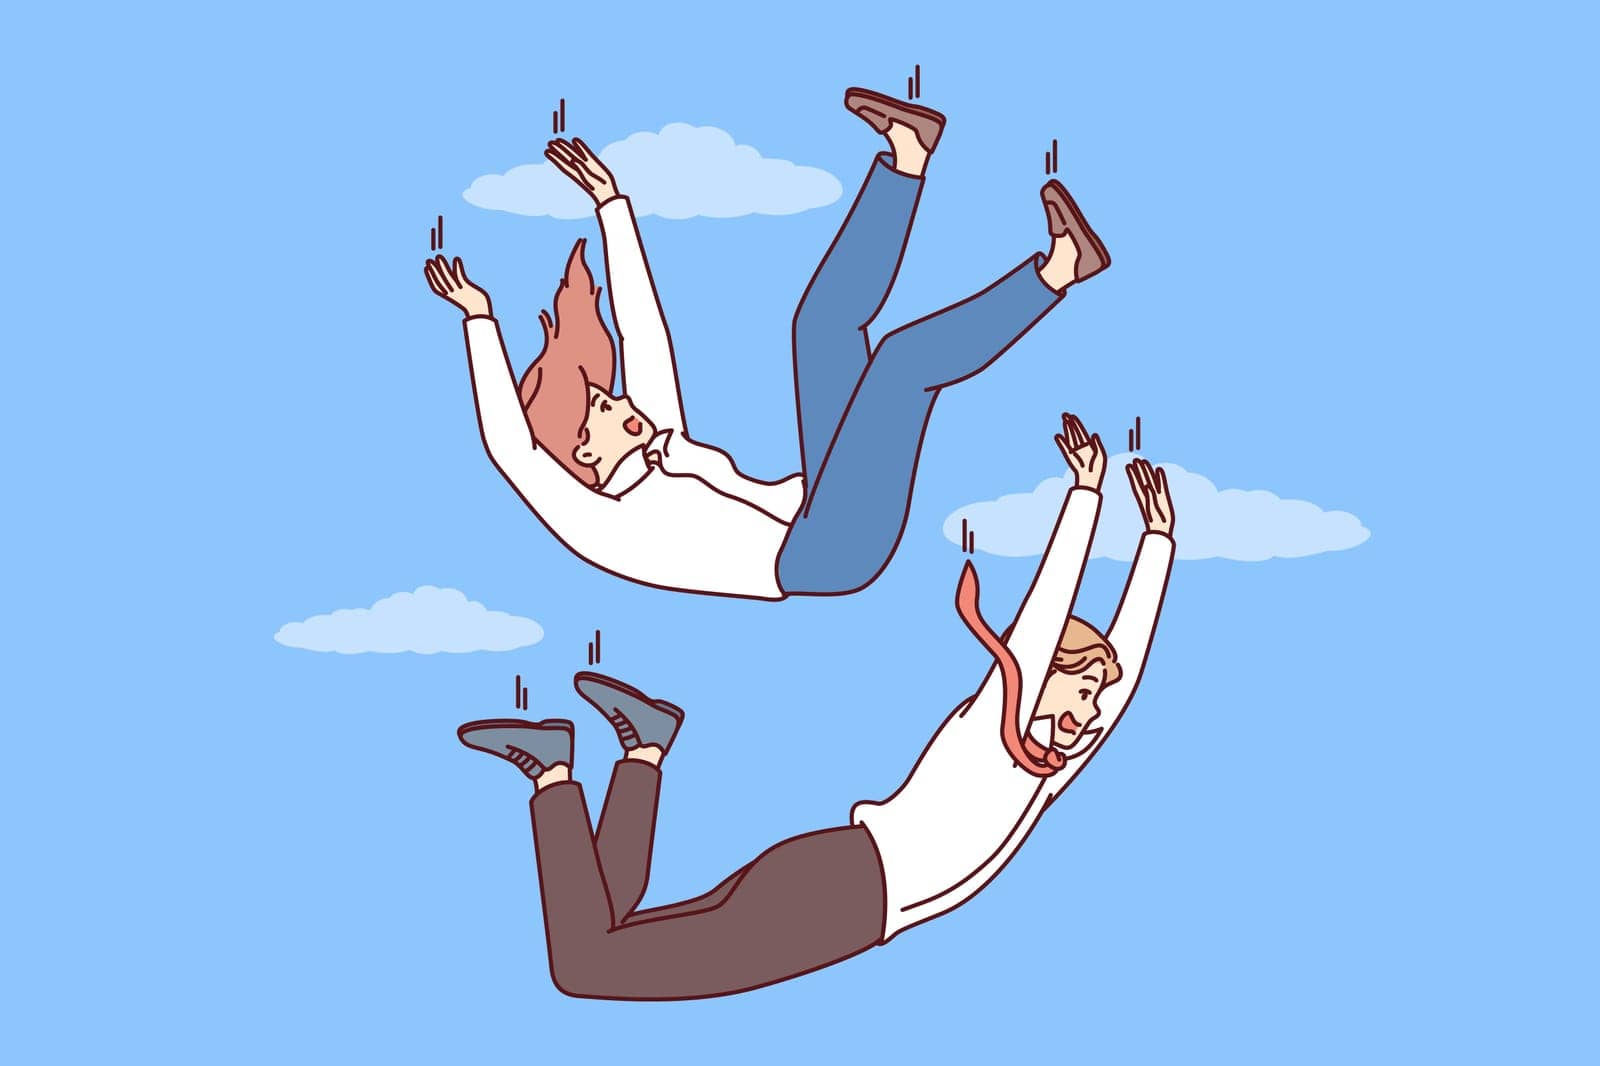 Man and woman in business clothes fall down for concept of employees in corporation or job loss. Colleagues falling among clouds symbolizes recession that caused problems in business and bankruptcy